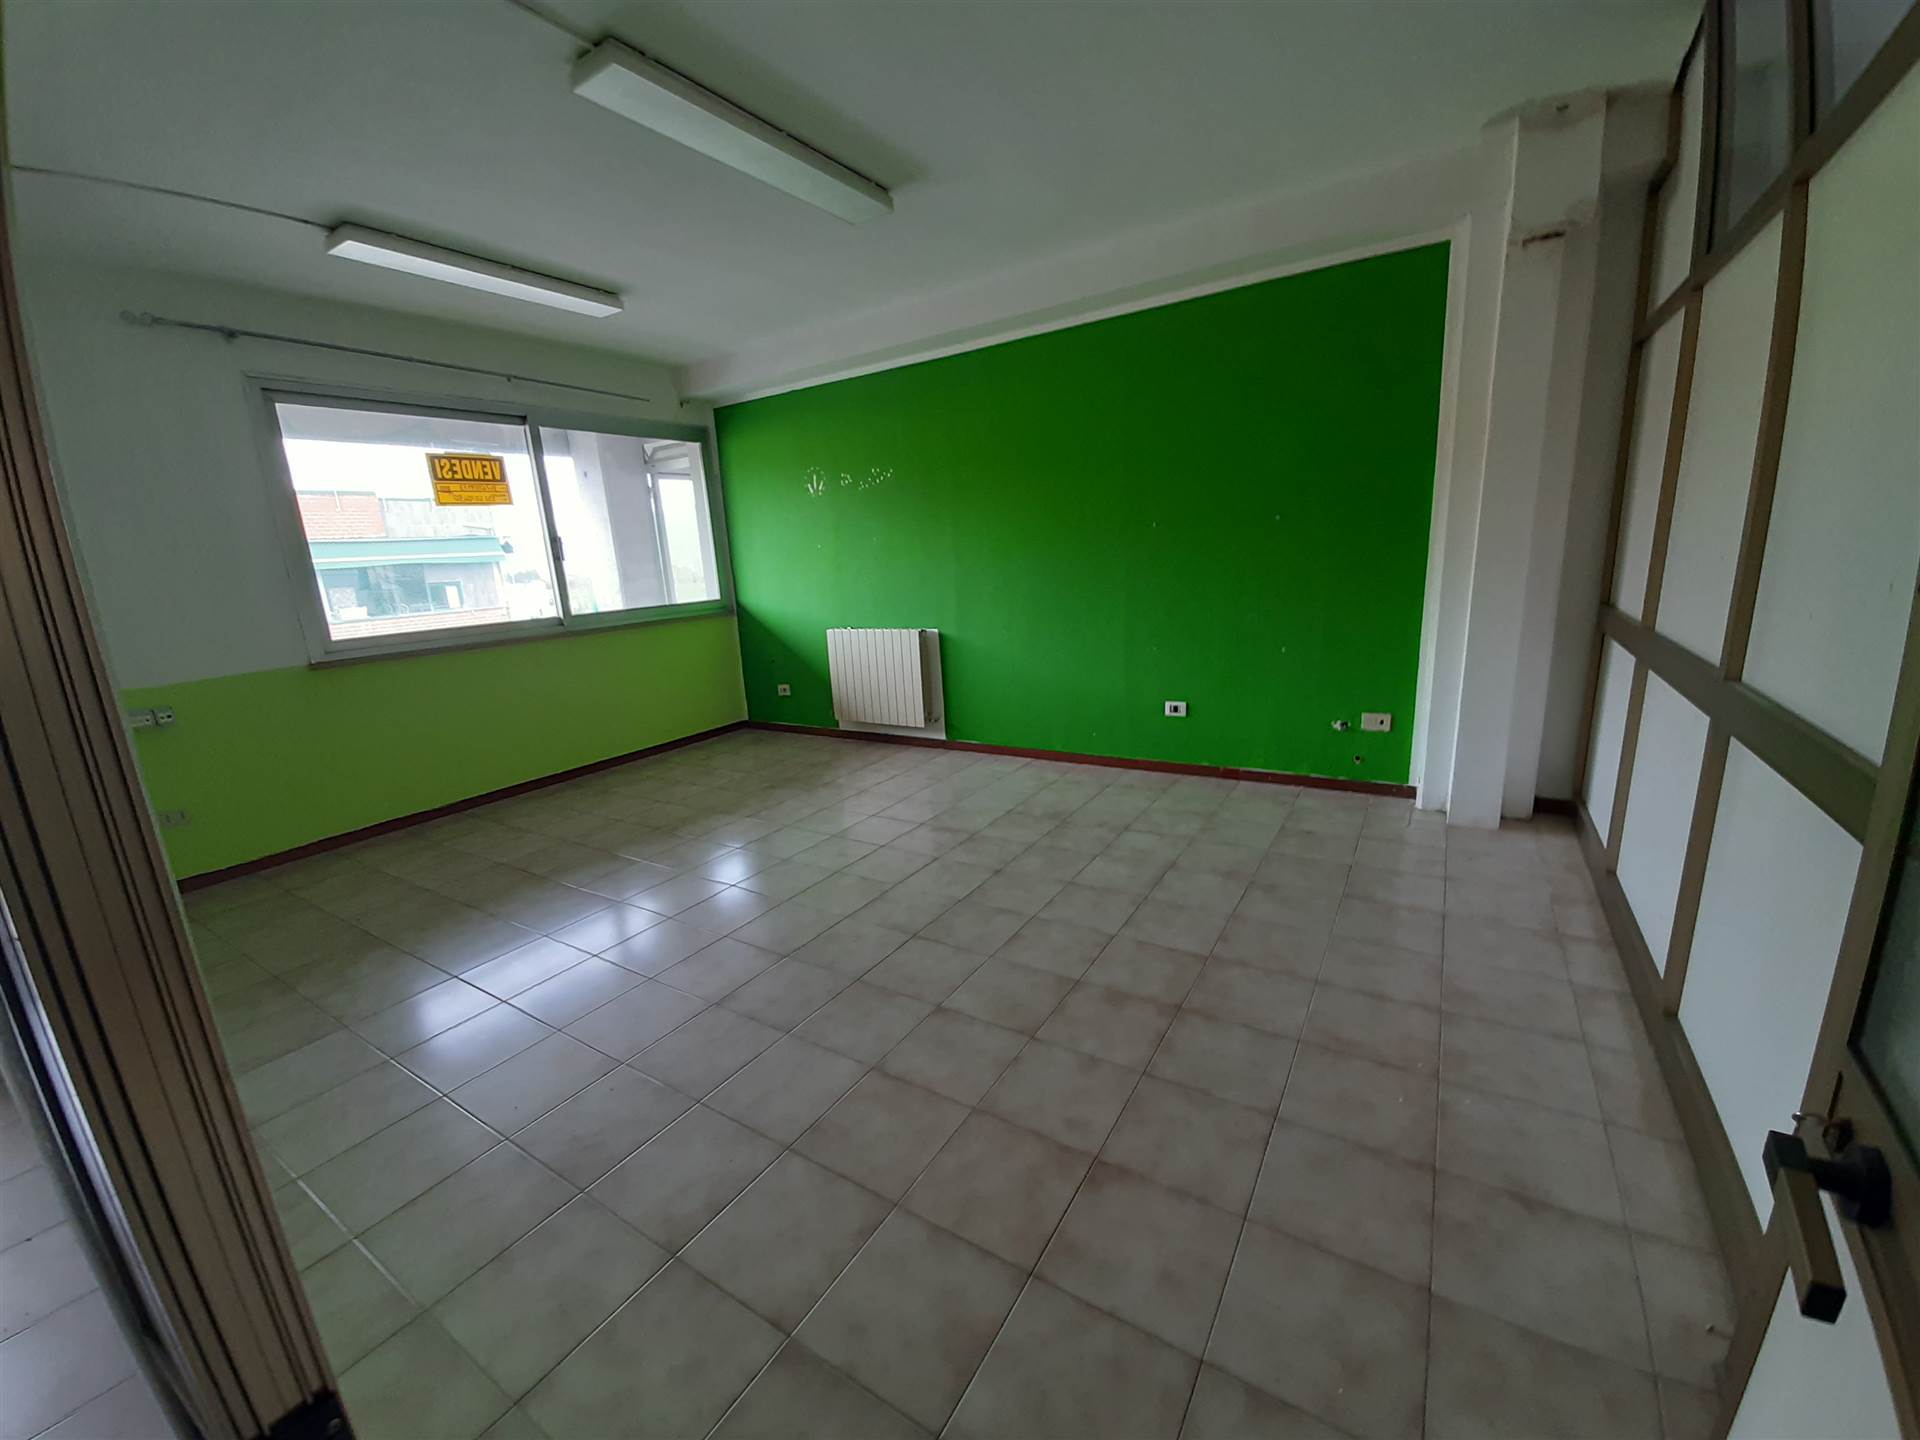 LA FONTINA, SAN GIULIANO TERME, Warehouse for sale of 95 Sq. mt., Energetic class: G, Epi: 6,8 kwh/m3 year, composed by: 3 Rooms, 1 Bathroom, Price: 